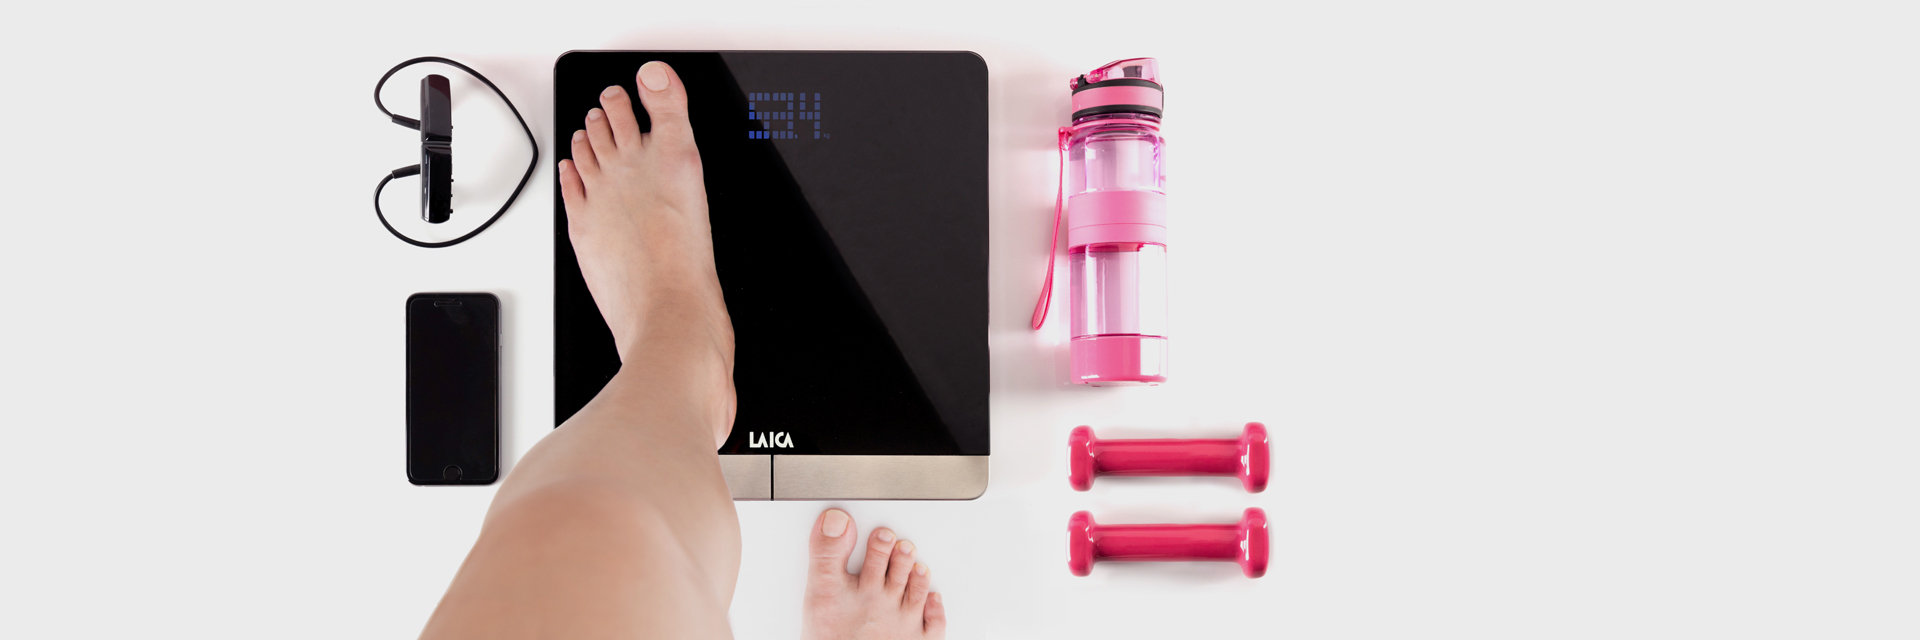 Personal scales LAICA
Technology for regular weight control